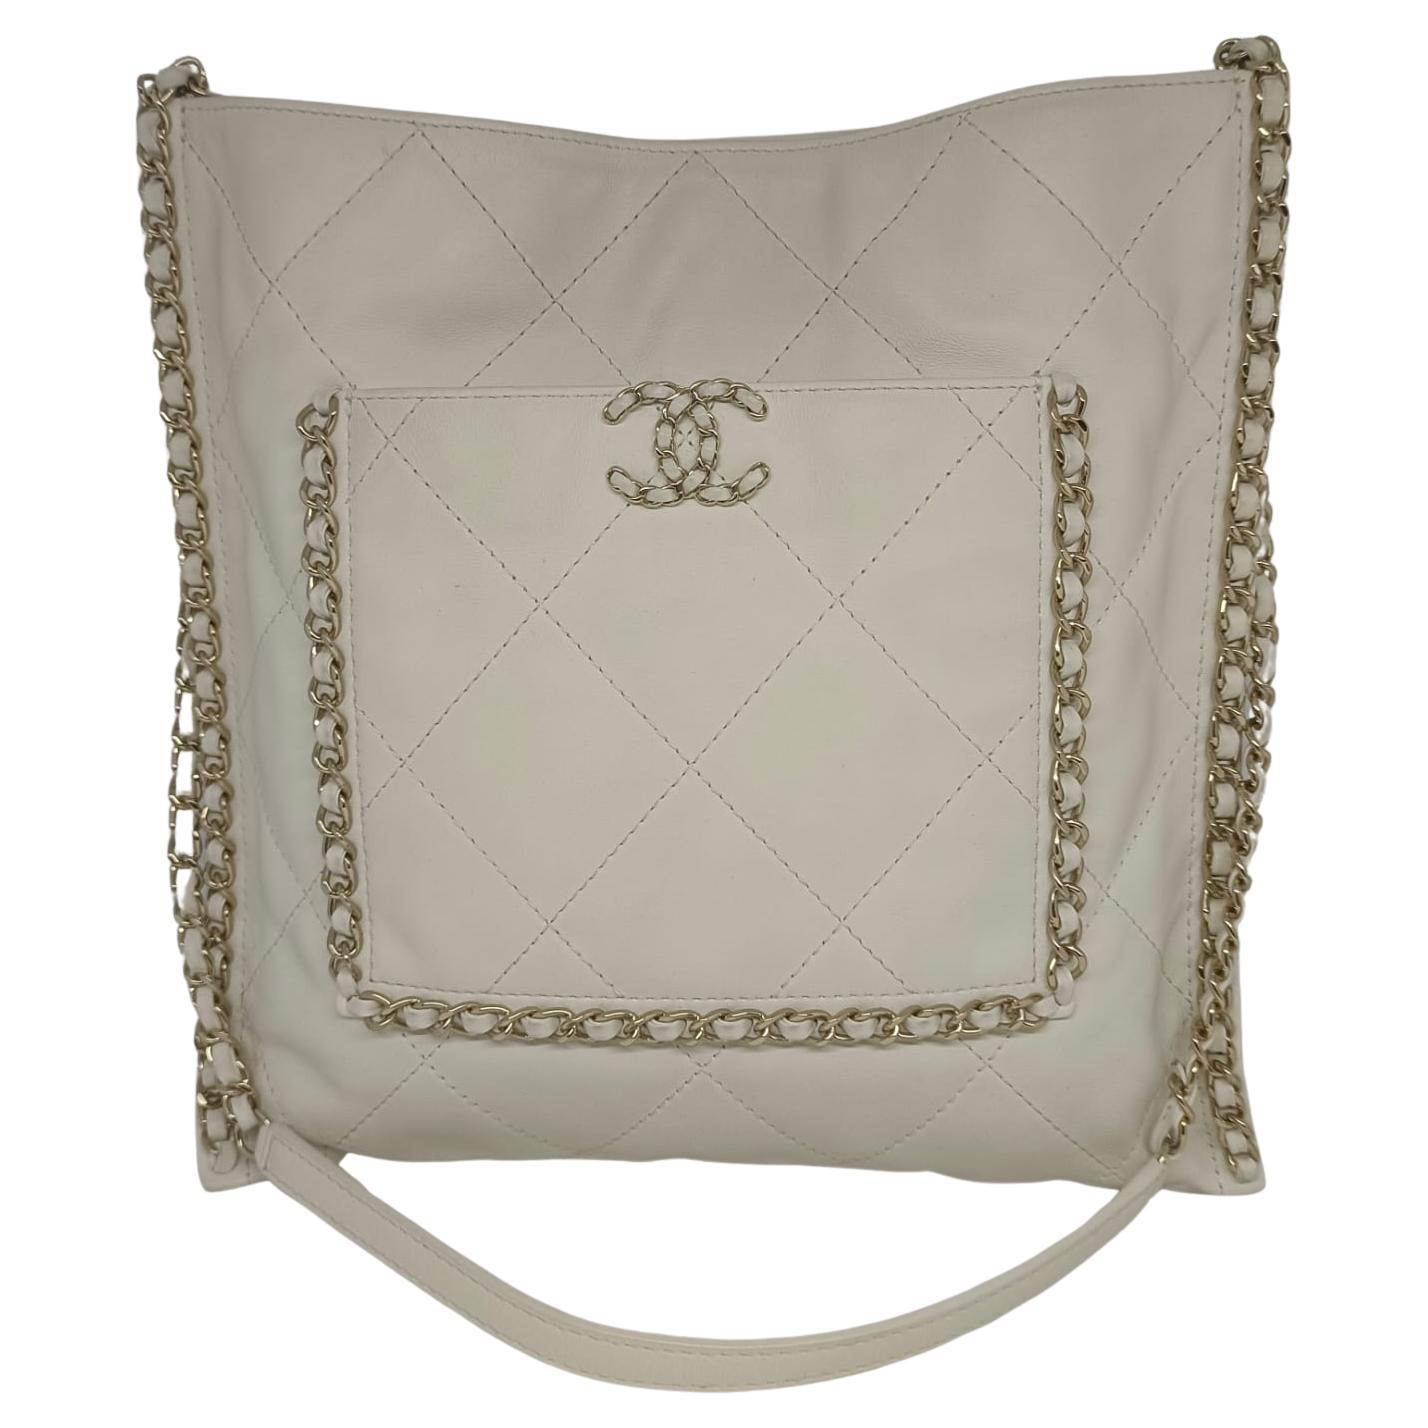 2022 Chanel White Calfskin Quilted Chain Trimmed Flat Tote Bag For Sale